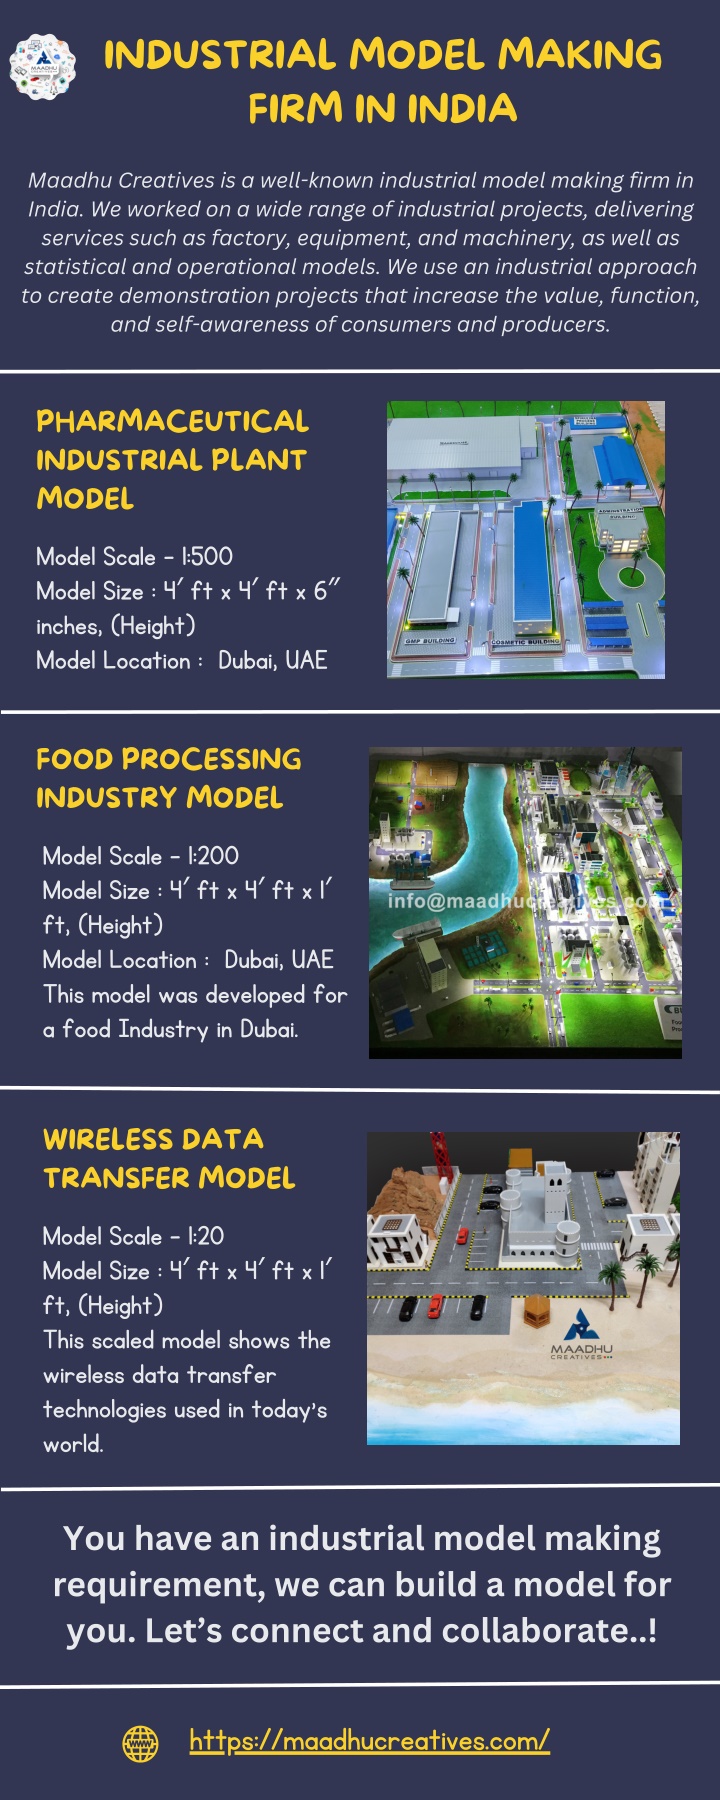 industrial model making firm in india